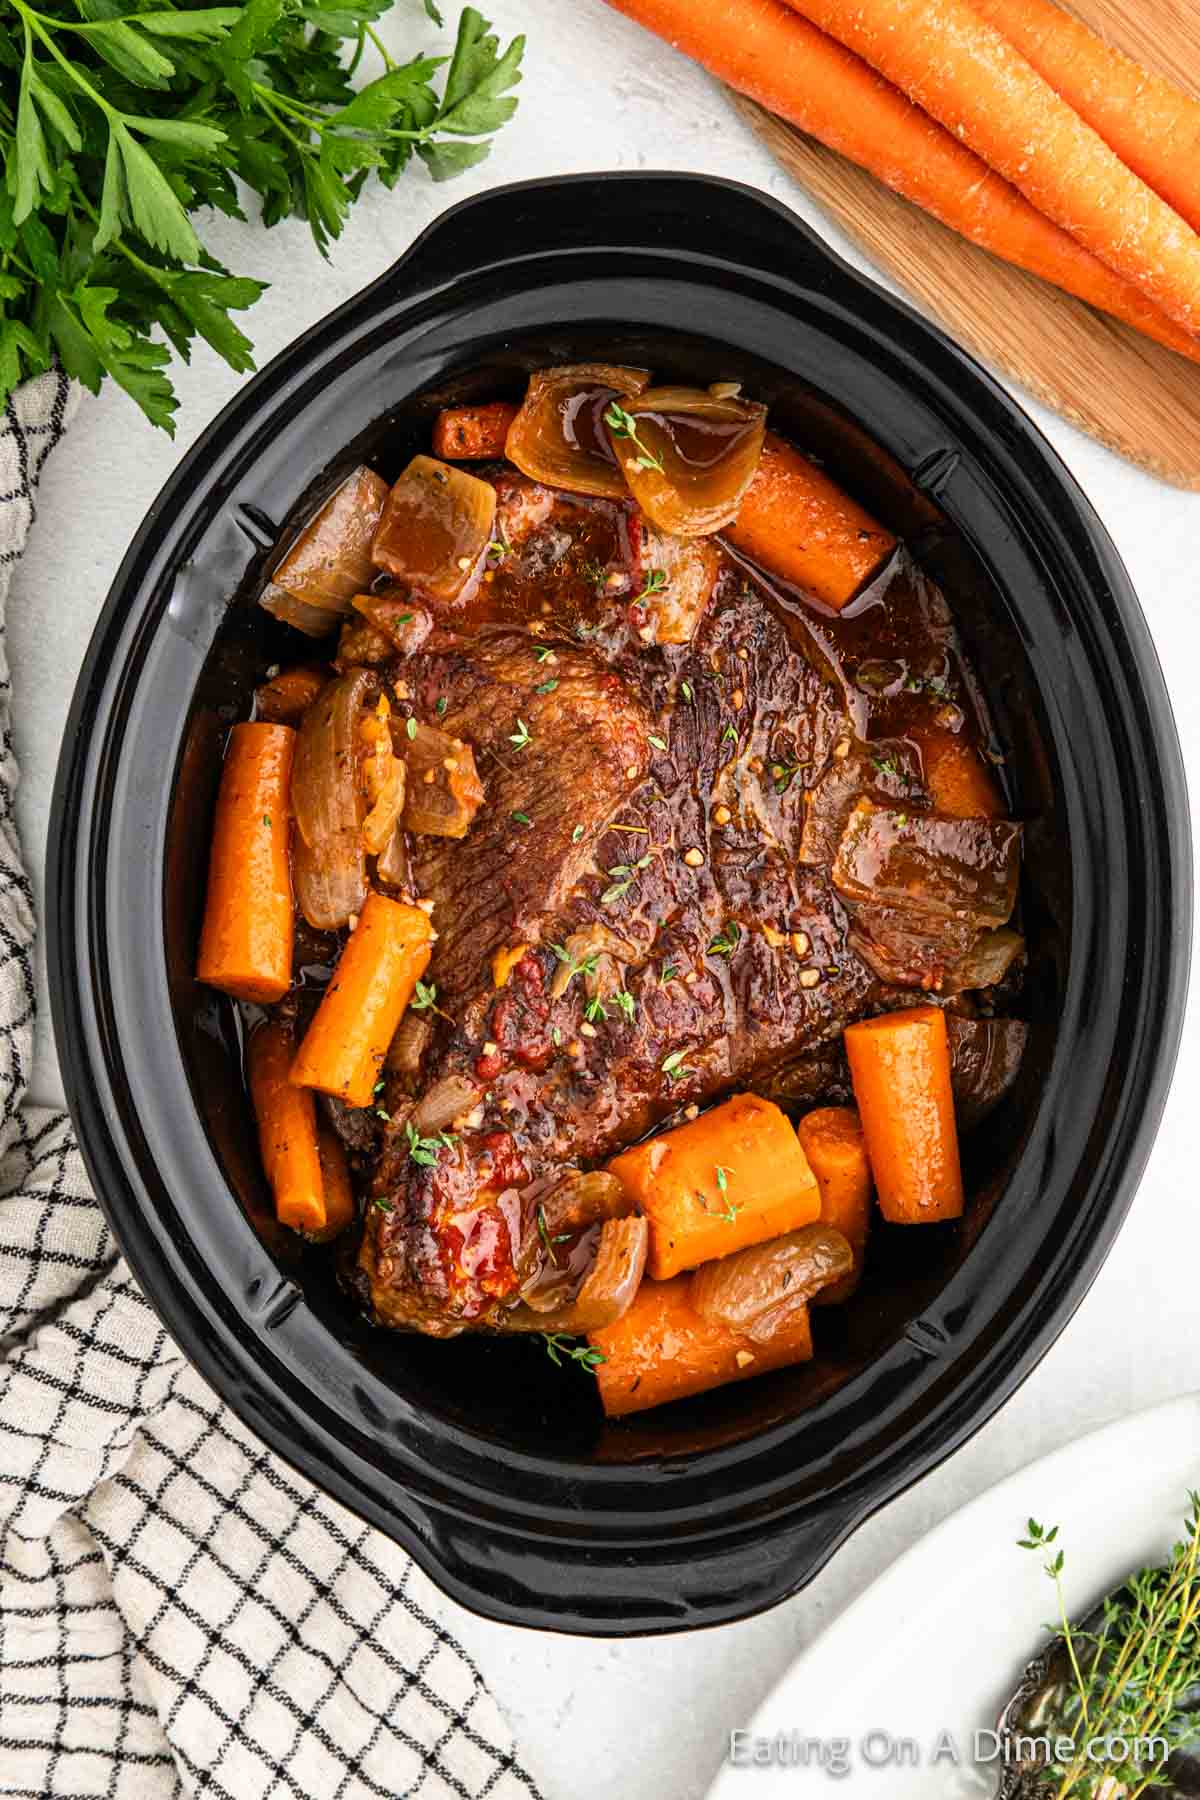 Cooked brisket in a slow cooker with carrots and onions